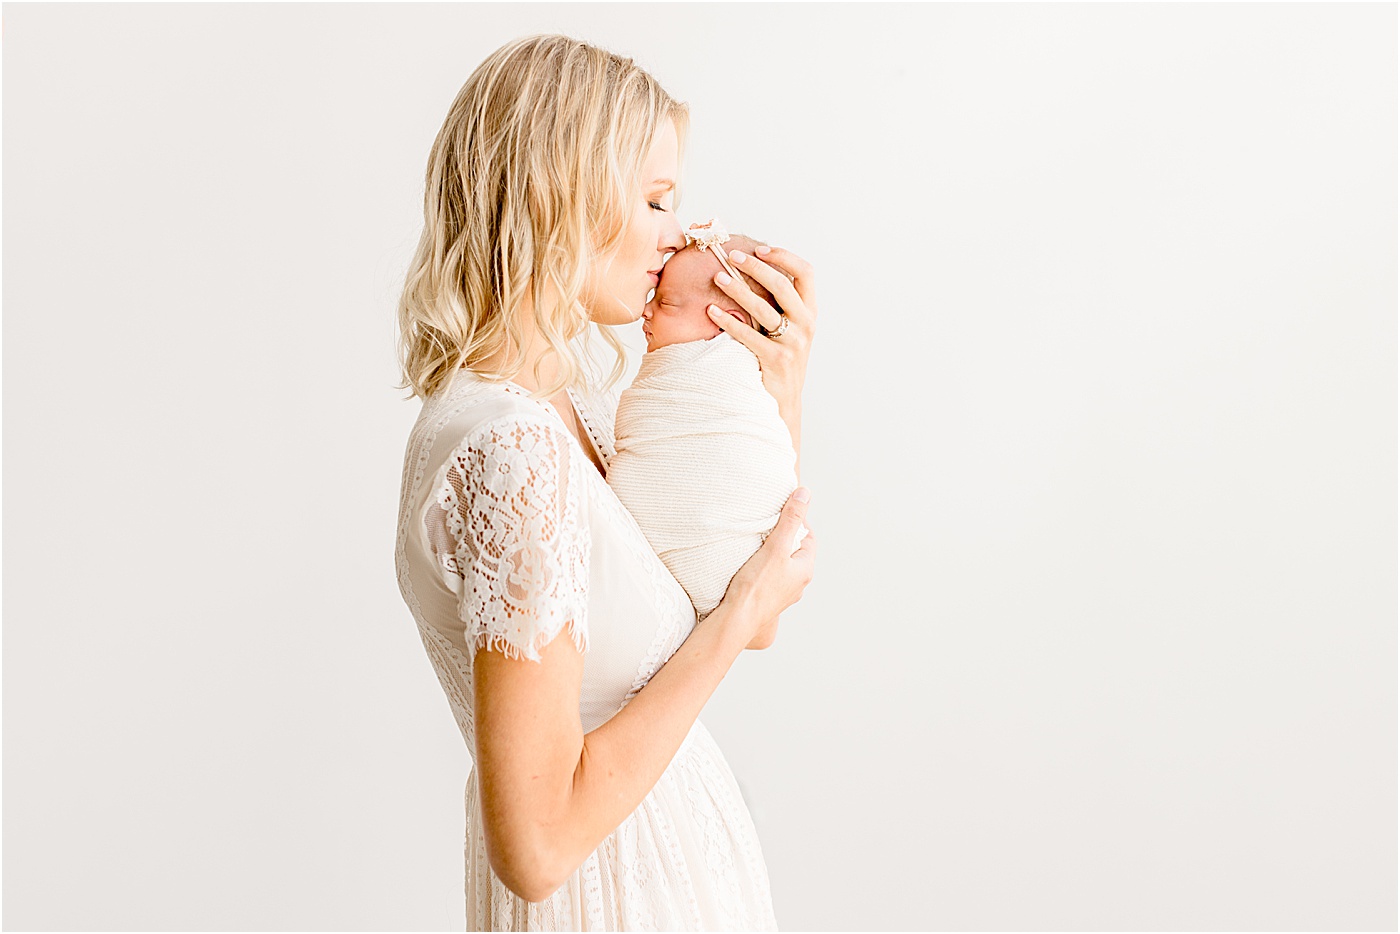 Mom holding baby girl and kissing her during newborn photos with Sana Ahmed Photography.